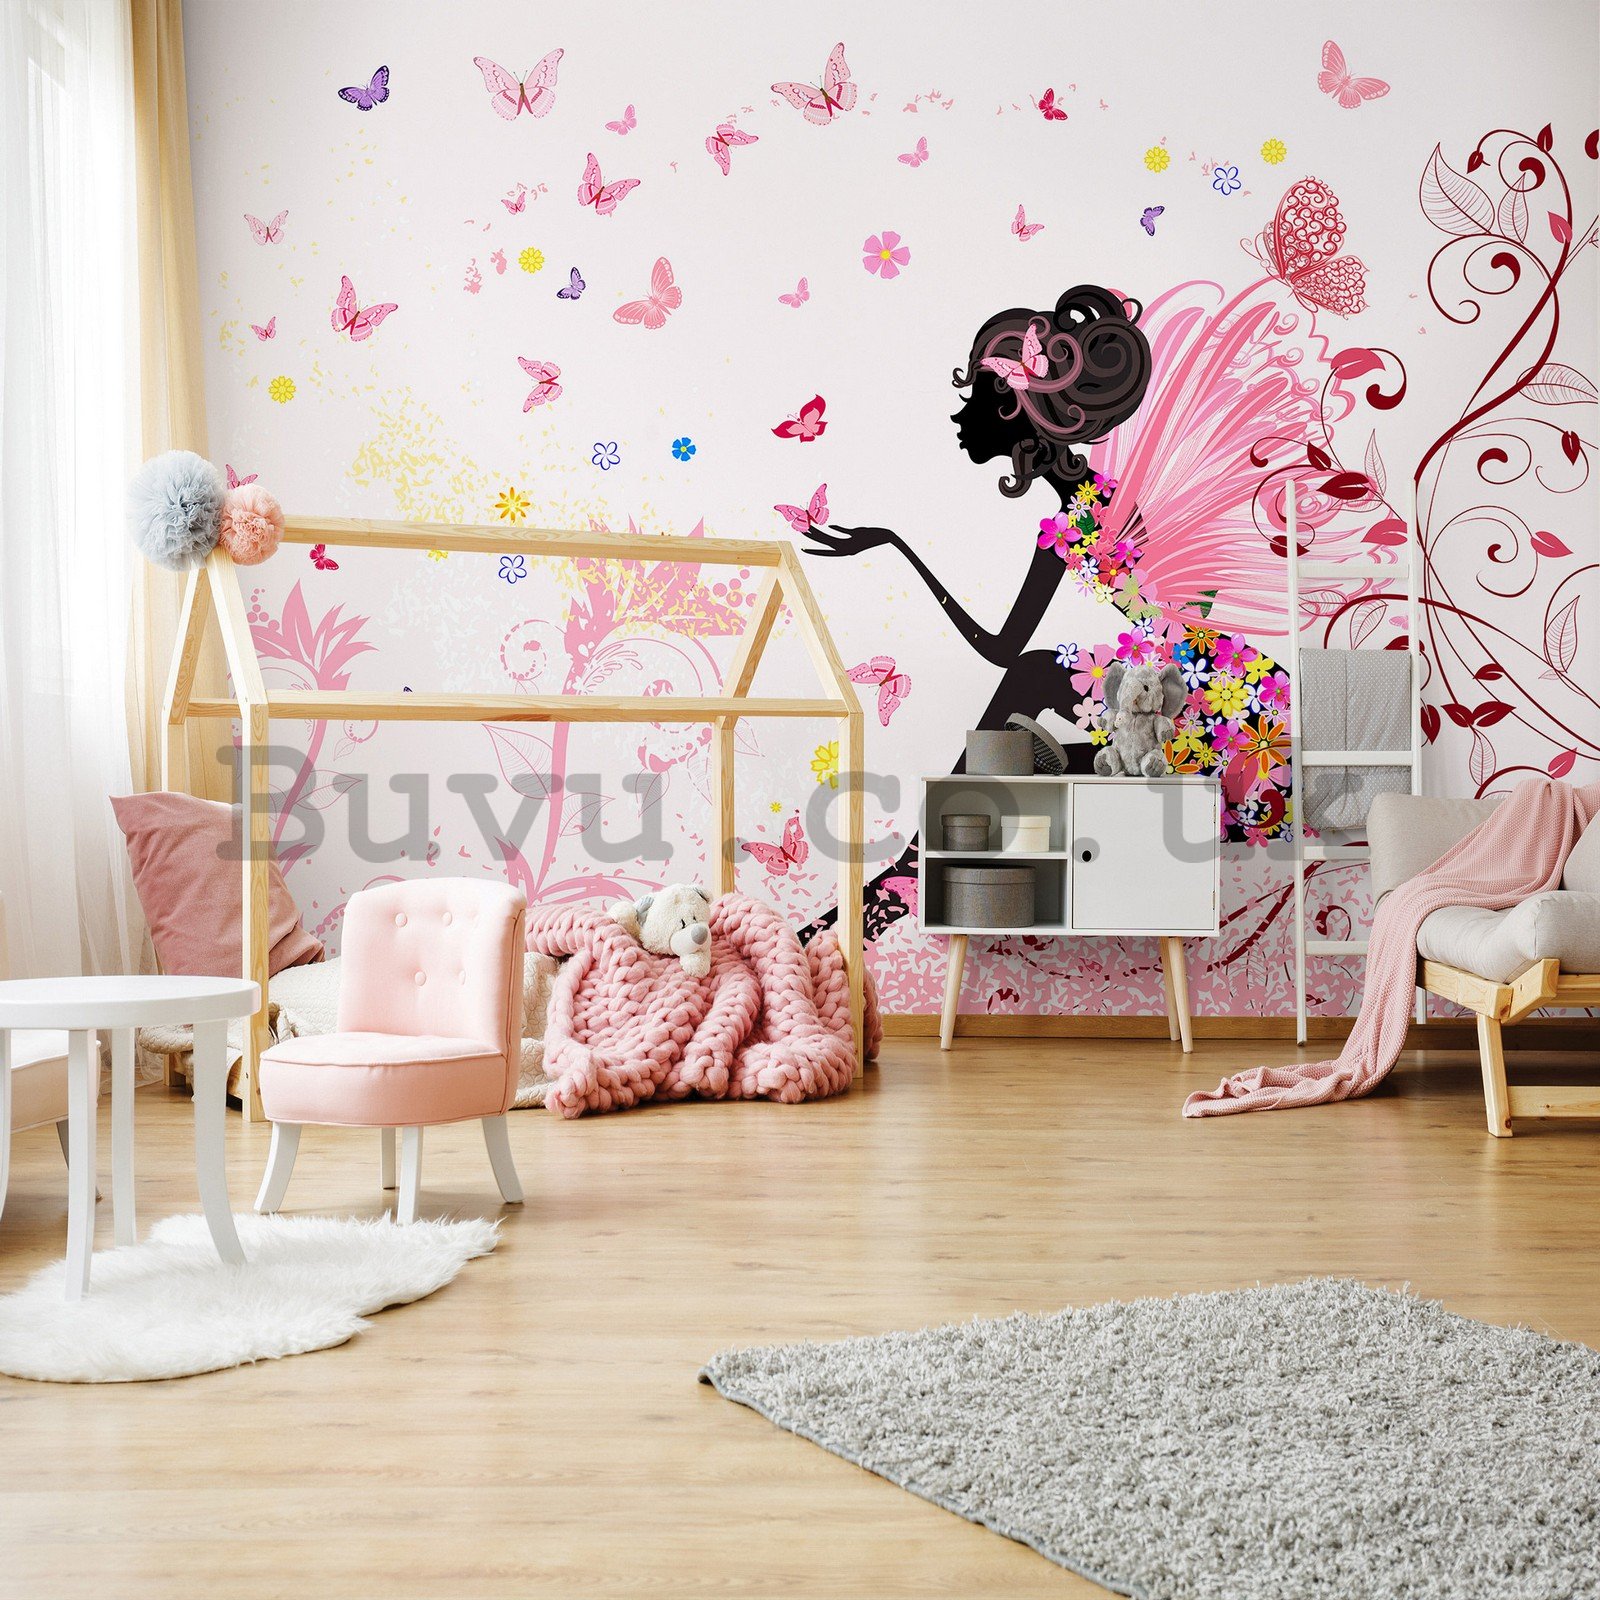 Wall mural vlies: Girl with flowers and butterflies - 254x184 cm